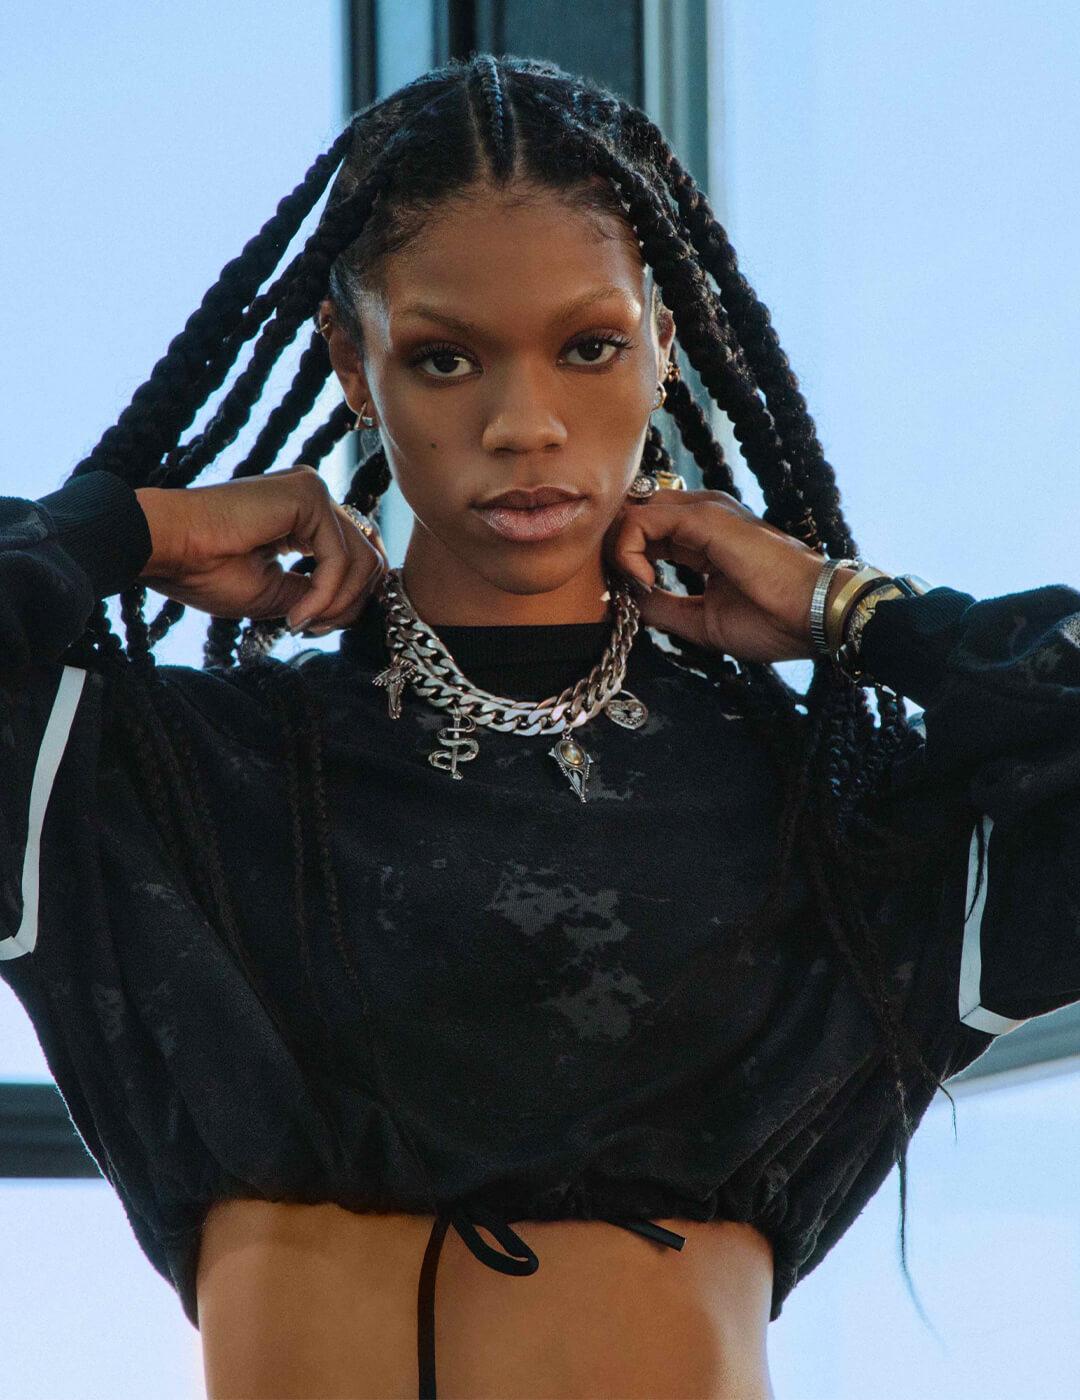 Vashti Cunningham looking fierce in a black cropped top, long box braids, and a silver necklace